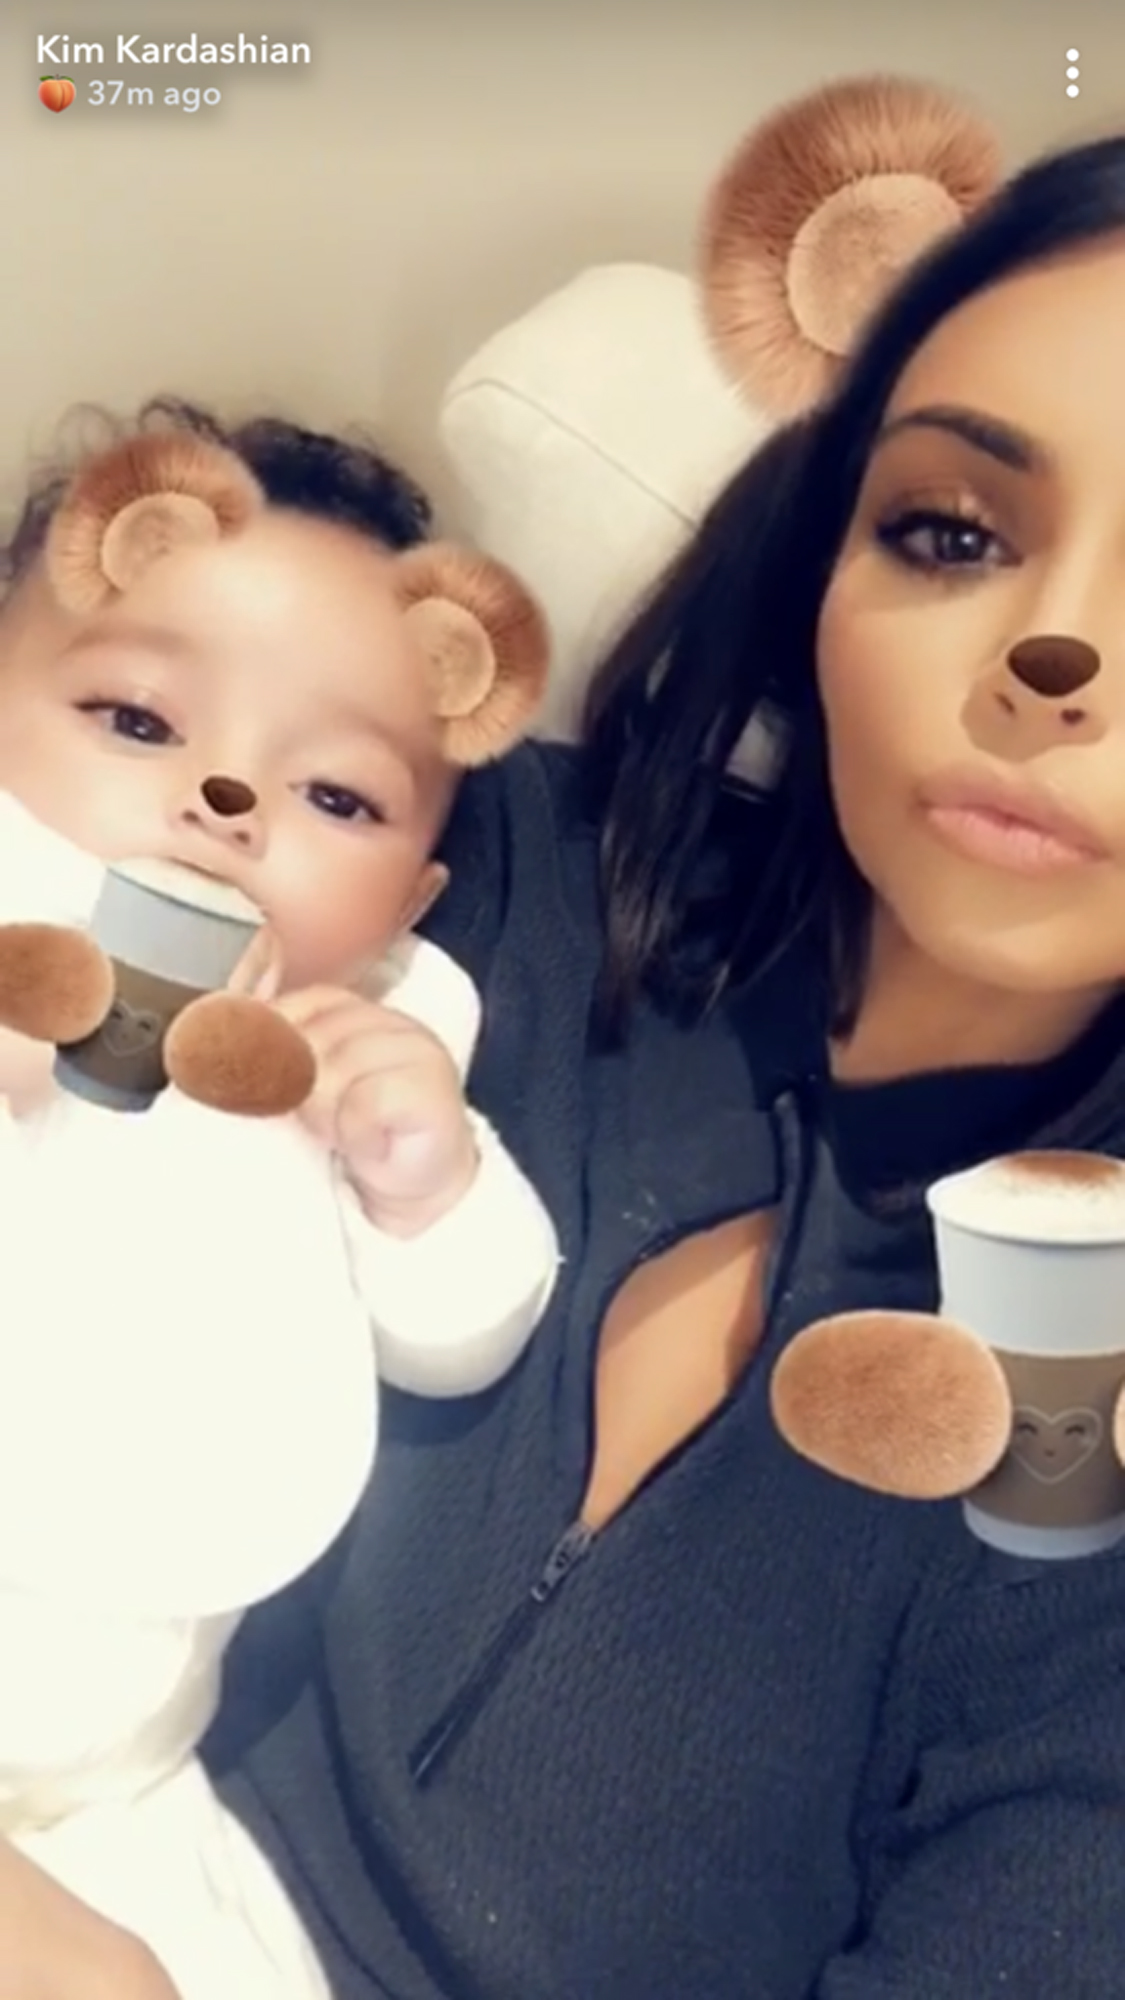 Kim Kardashian Posts Video of Baby Chicago After Kanye West Reveals Opioid Addiction